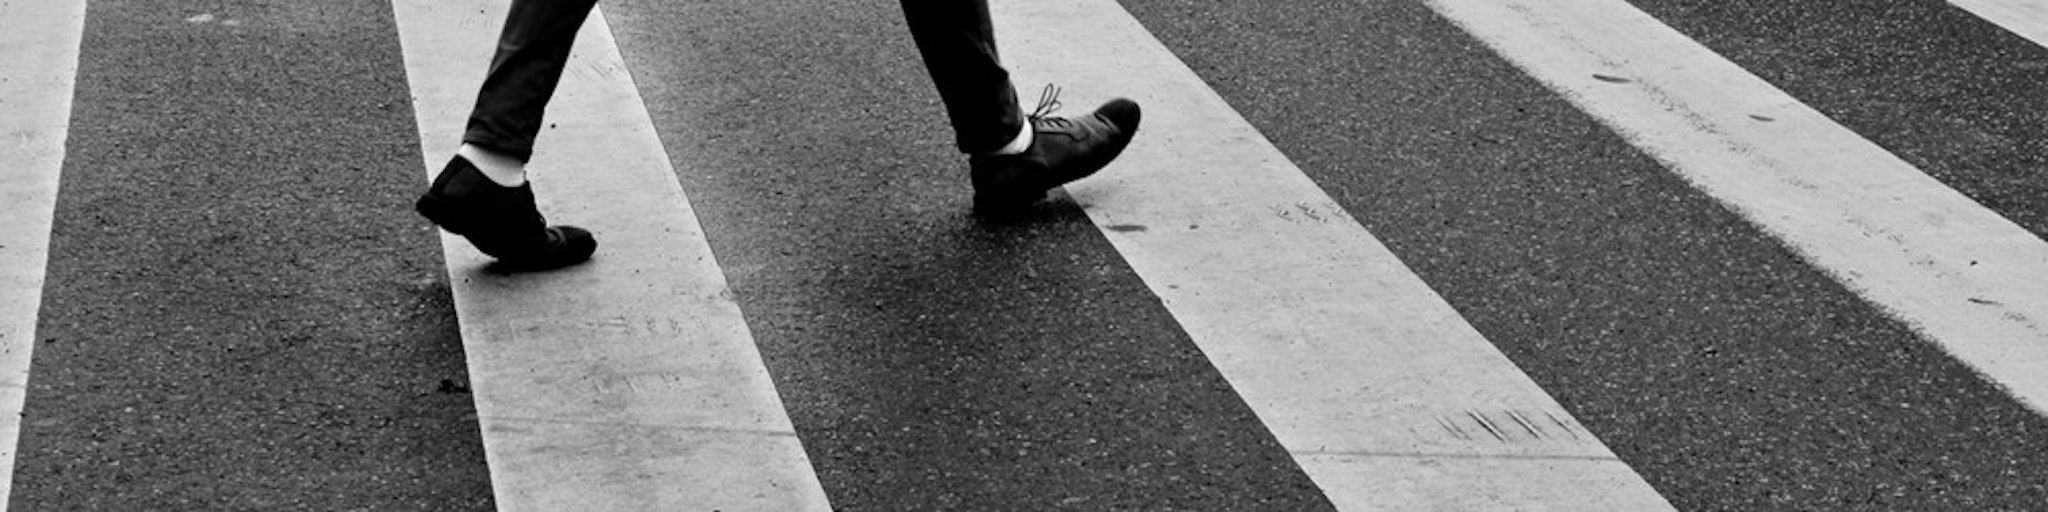 Cover Image for 6 Things to Do If You’re Injured in a Pedestrian Accident